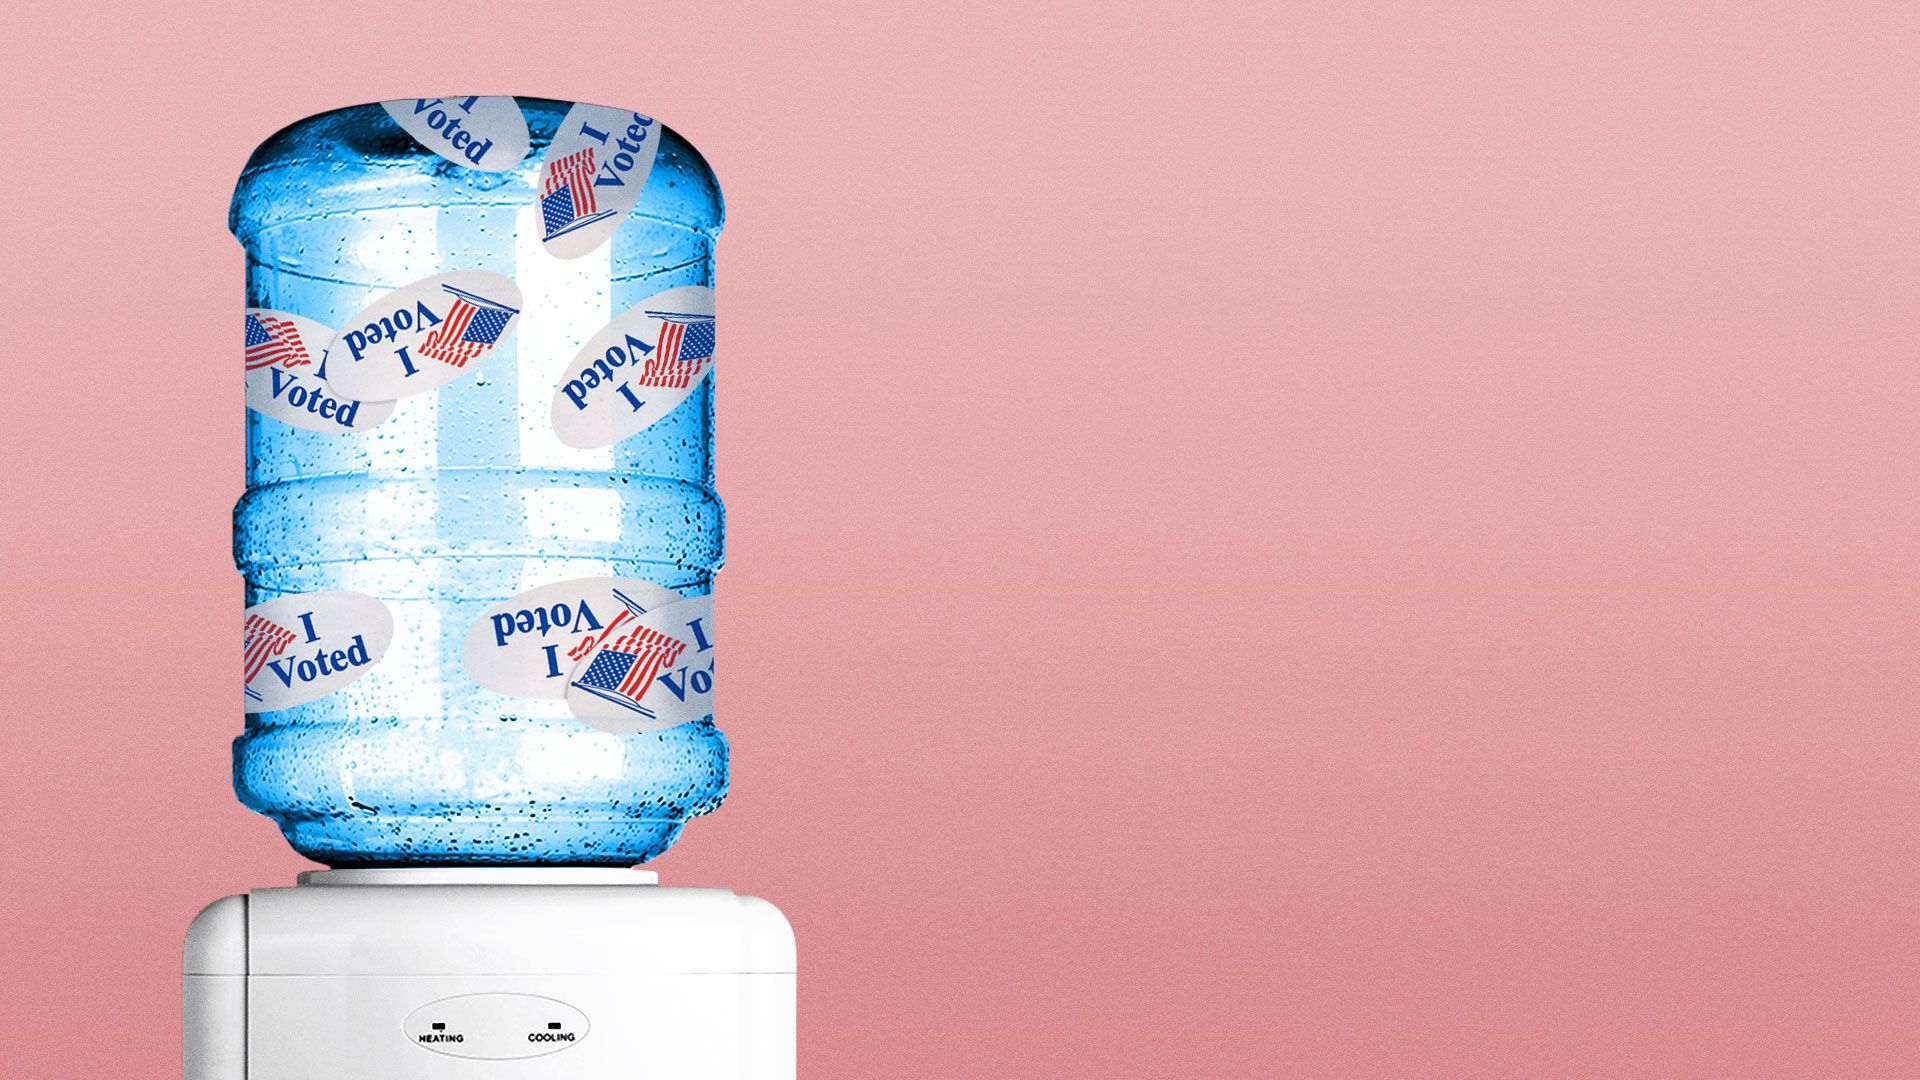 Illustration of water cooler with “I voted” stickers